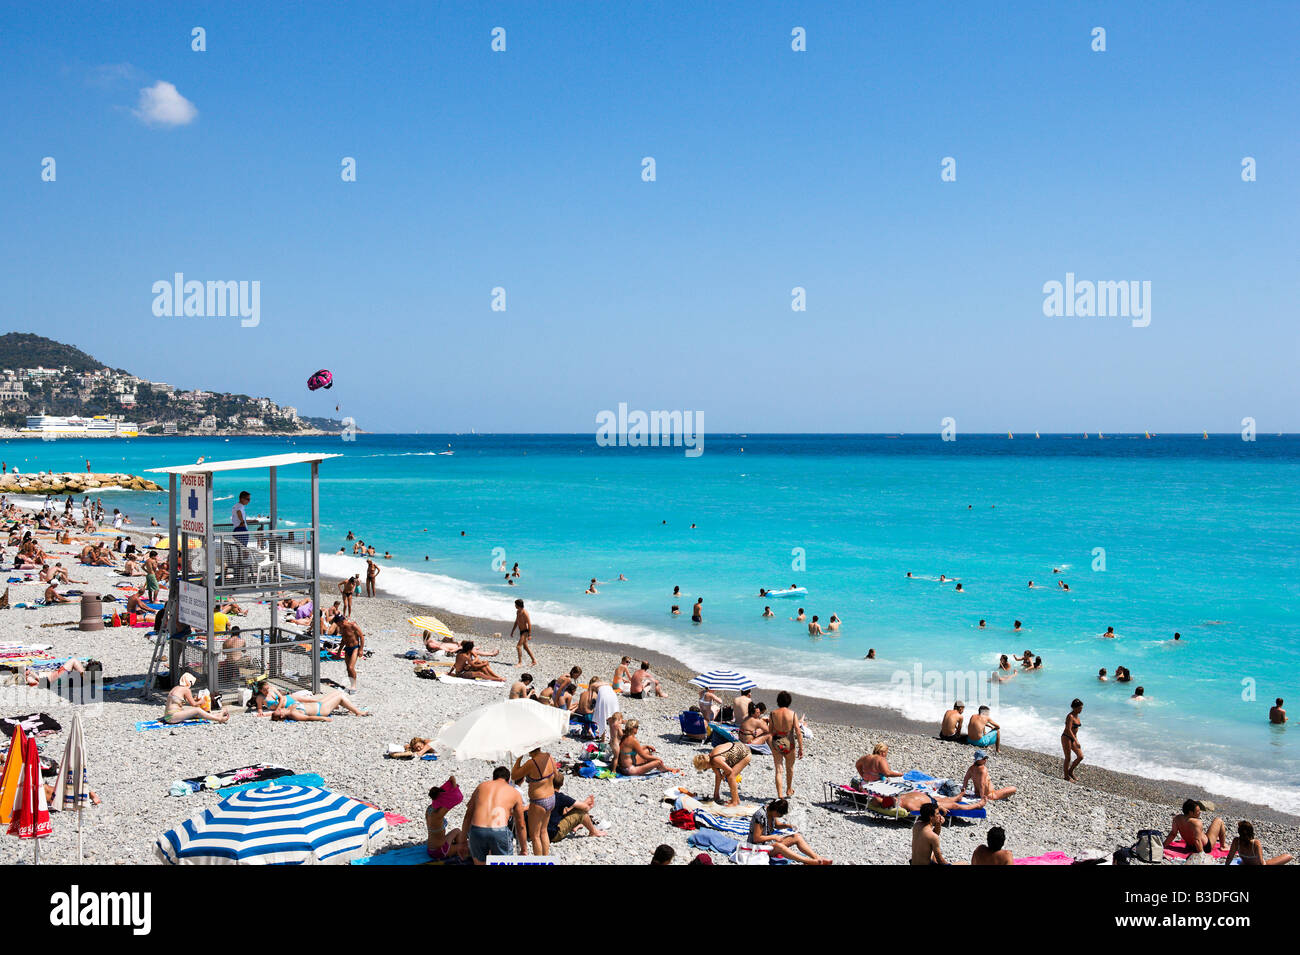 Beach off the Promenade des Anglais, Nice, Cote d'Azur, French Riviera, France Stock Photo